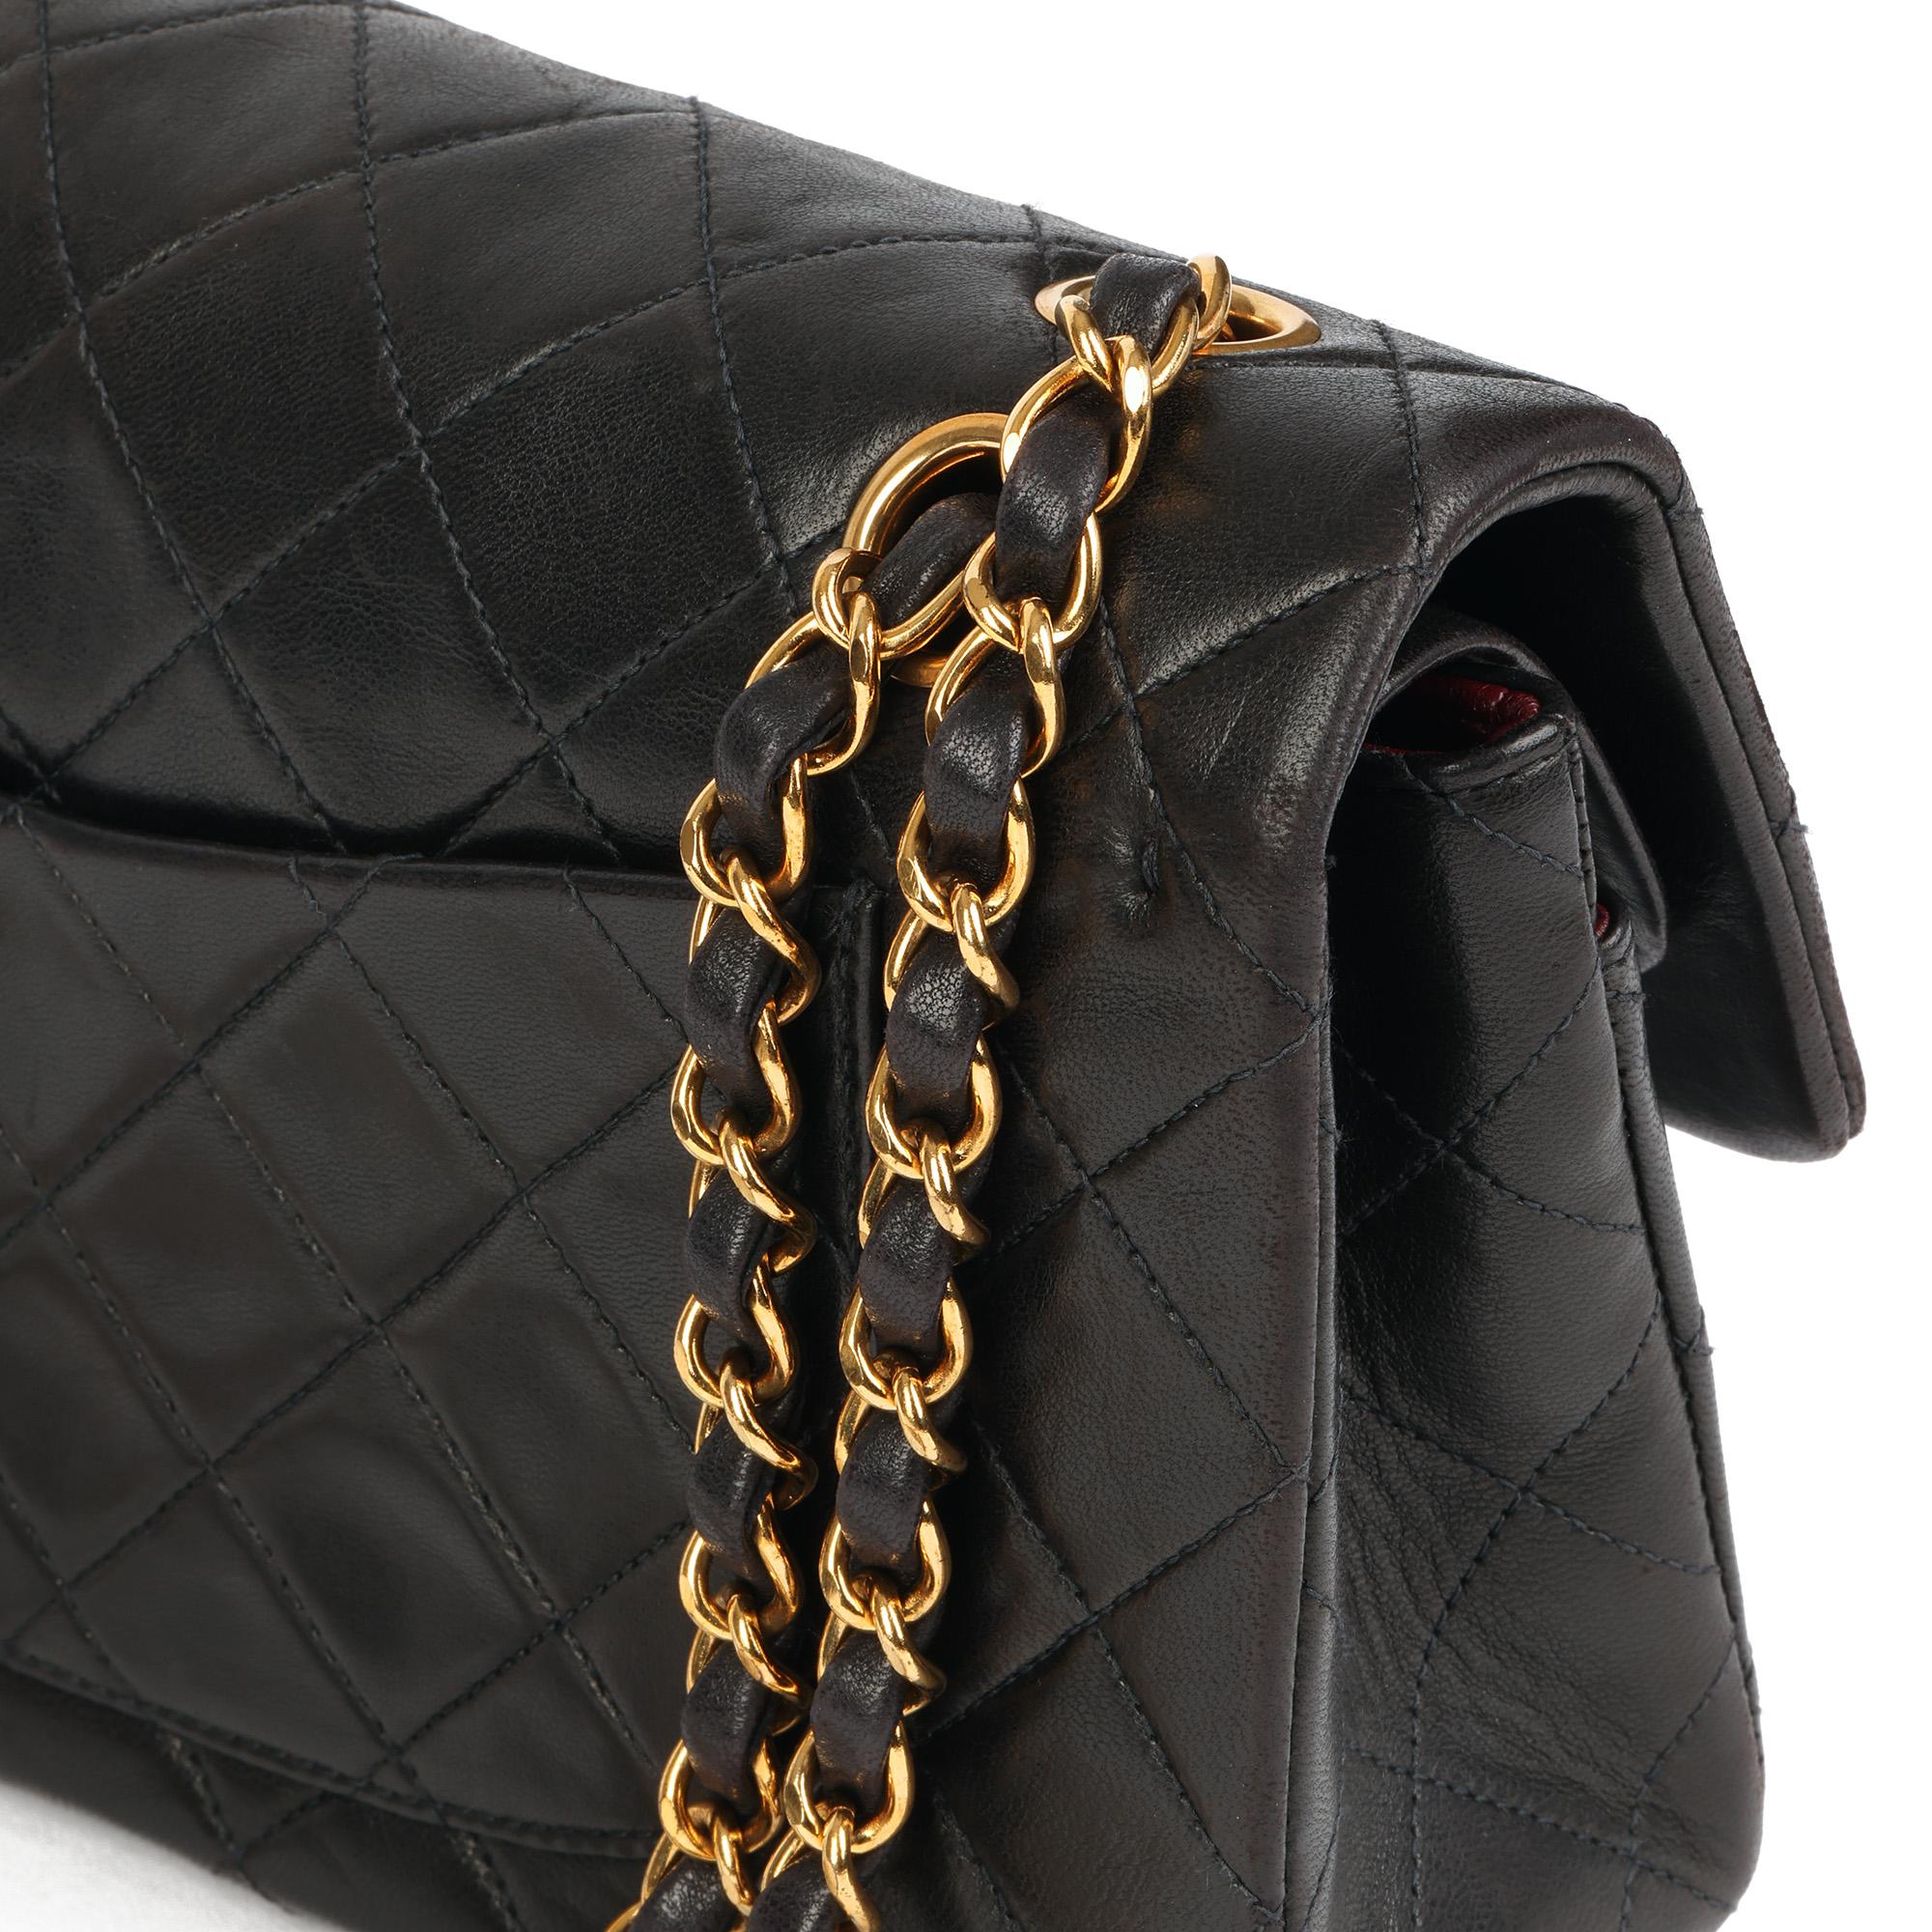 CHANEL
Black Quilted Lambskin Vintage Small Classic Double Flap Bag 

Serial Number: 3732982
Age (Circa): 1995
Accompanied By: Chanel Dust Bag, Box, Authenticity Card, Care Booklet
Authenticity Details: Authenticity Card, Serial Sticker (Made in